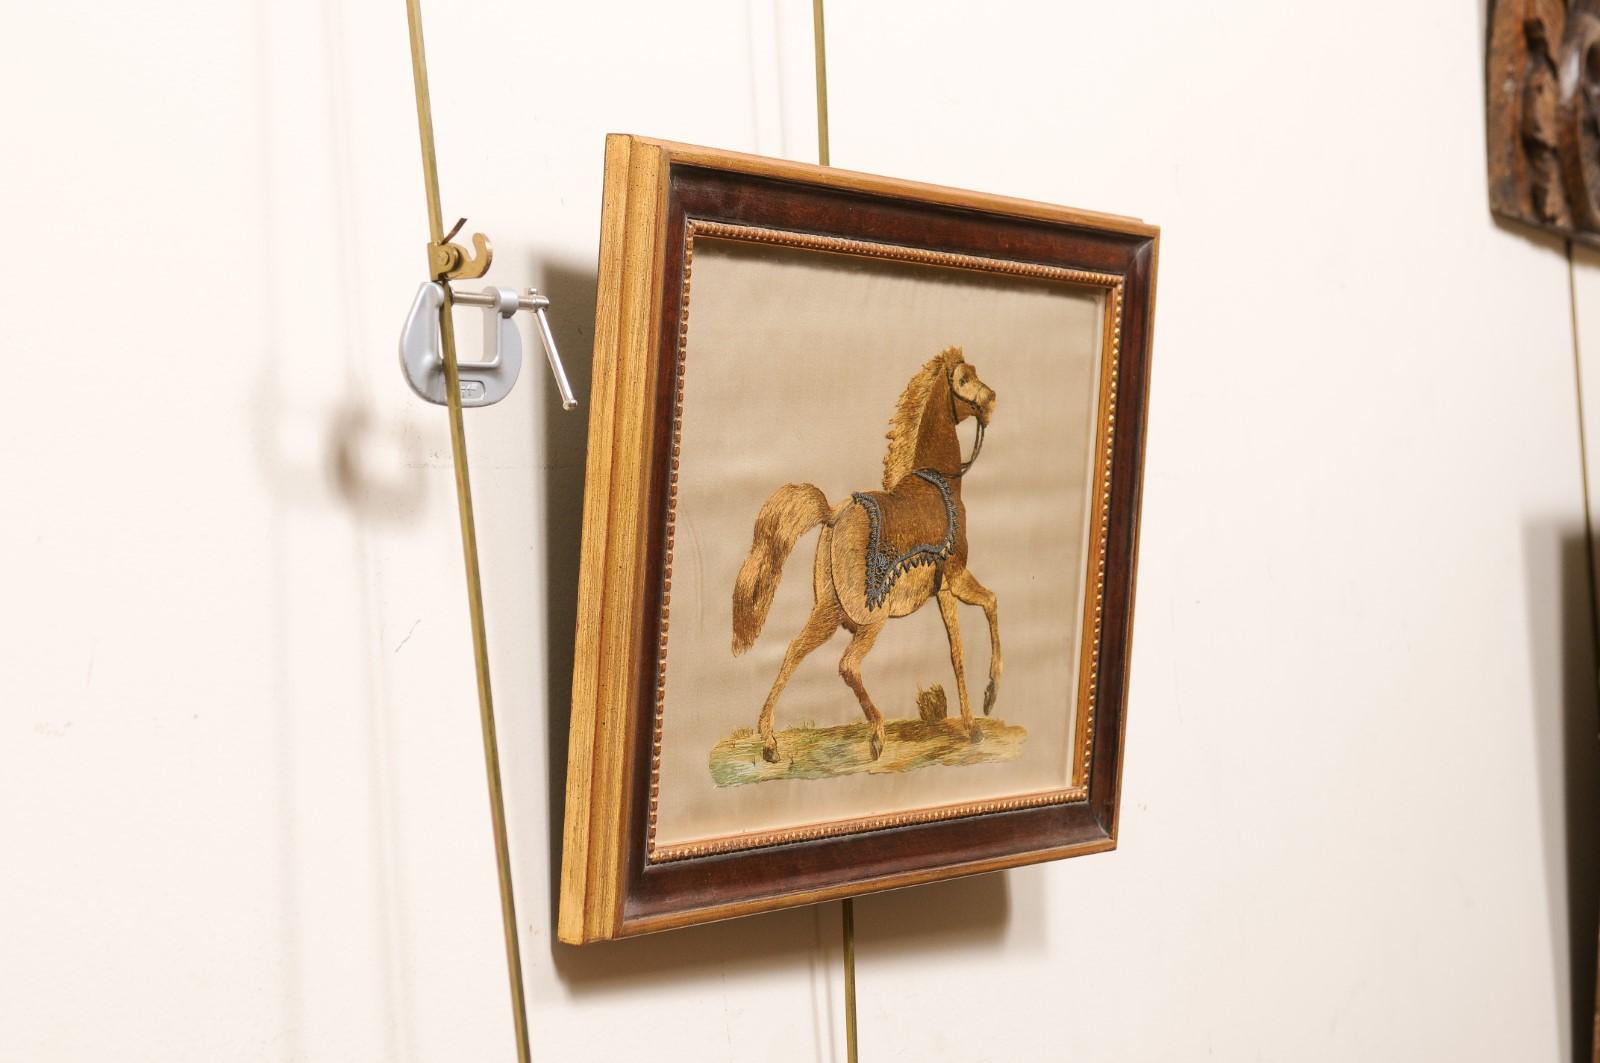 Framed 19th Century Silk Embroidery of Horse In Good Condition For Sale In Atlanta, GA